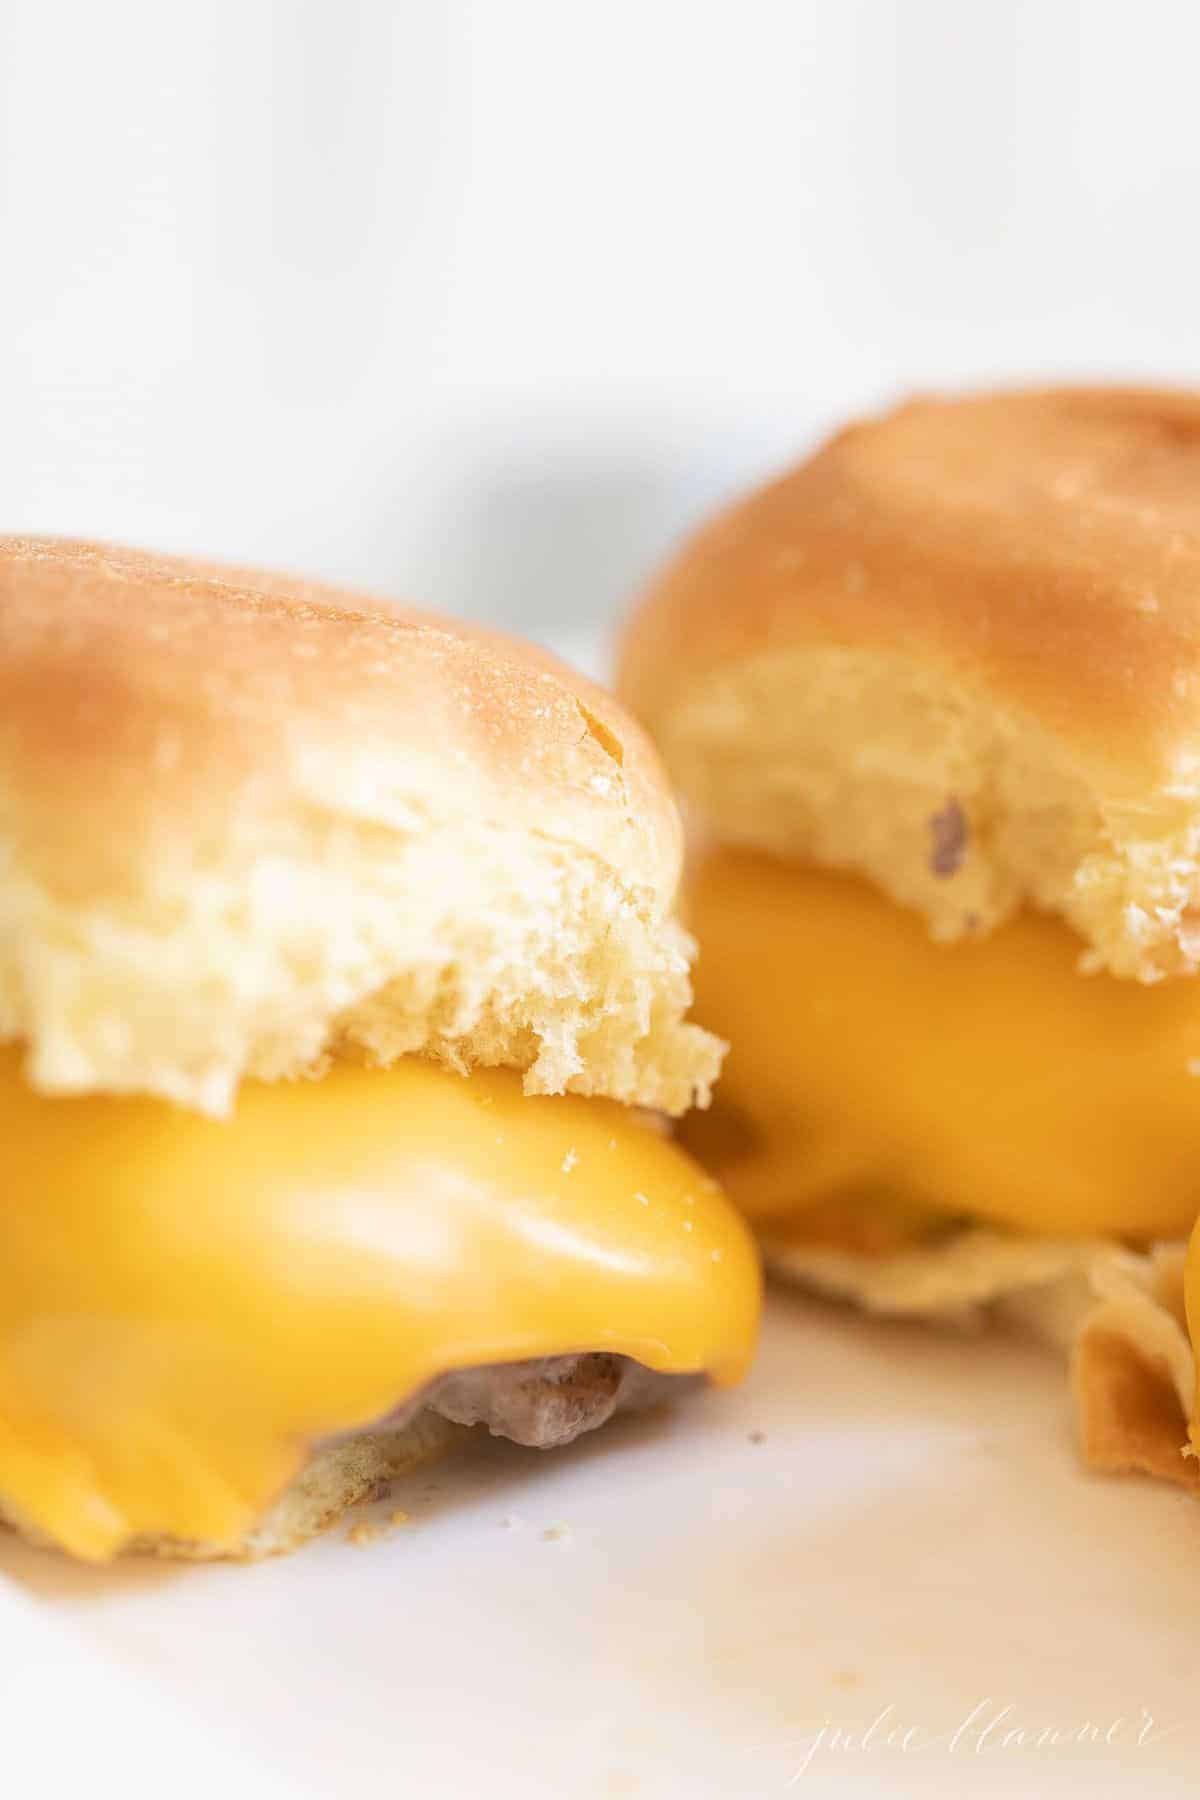 Pair of mini sliders with melted American cheese, close-up. #sliders